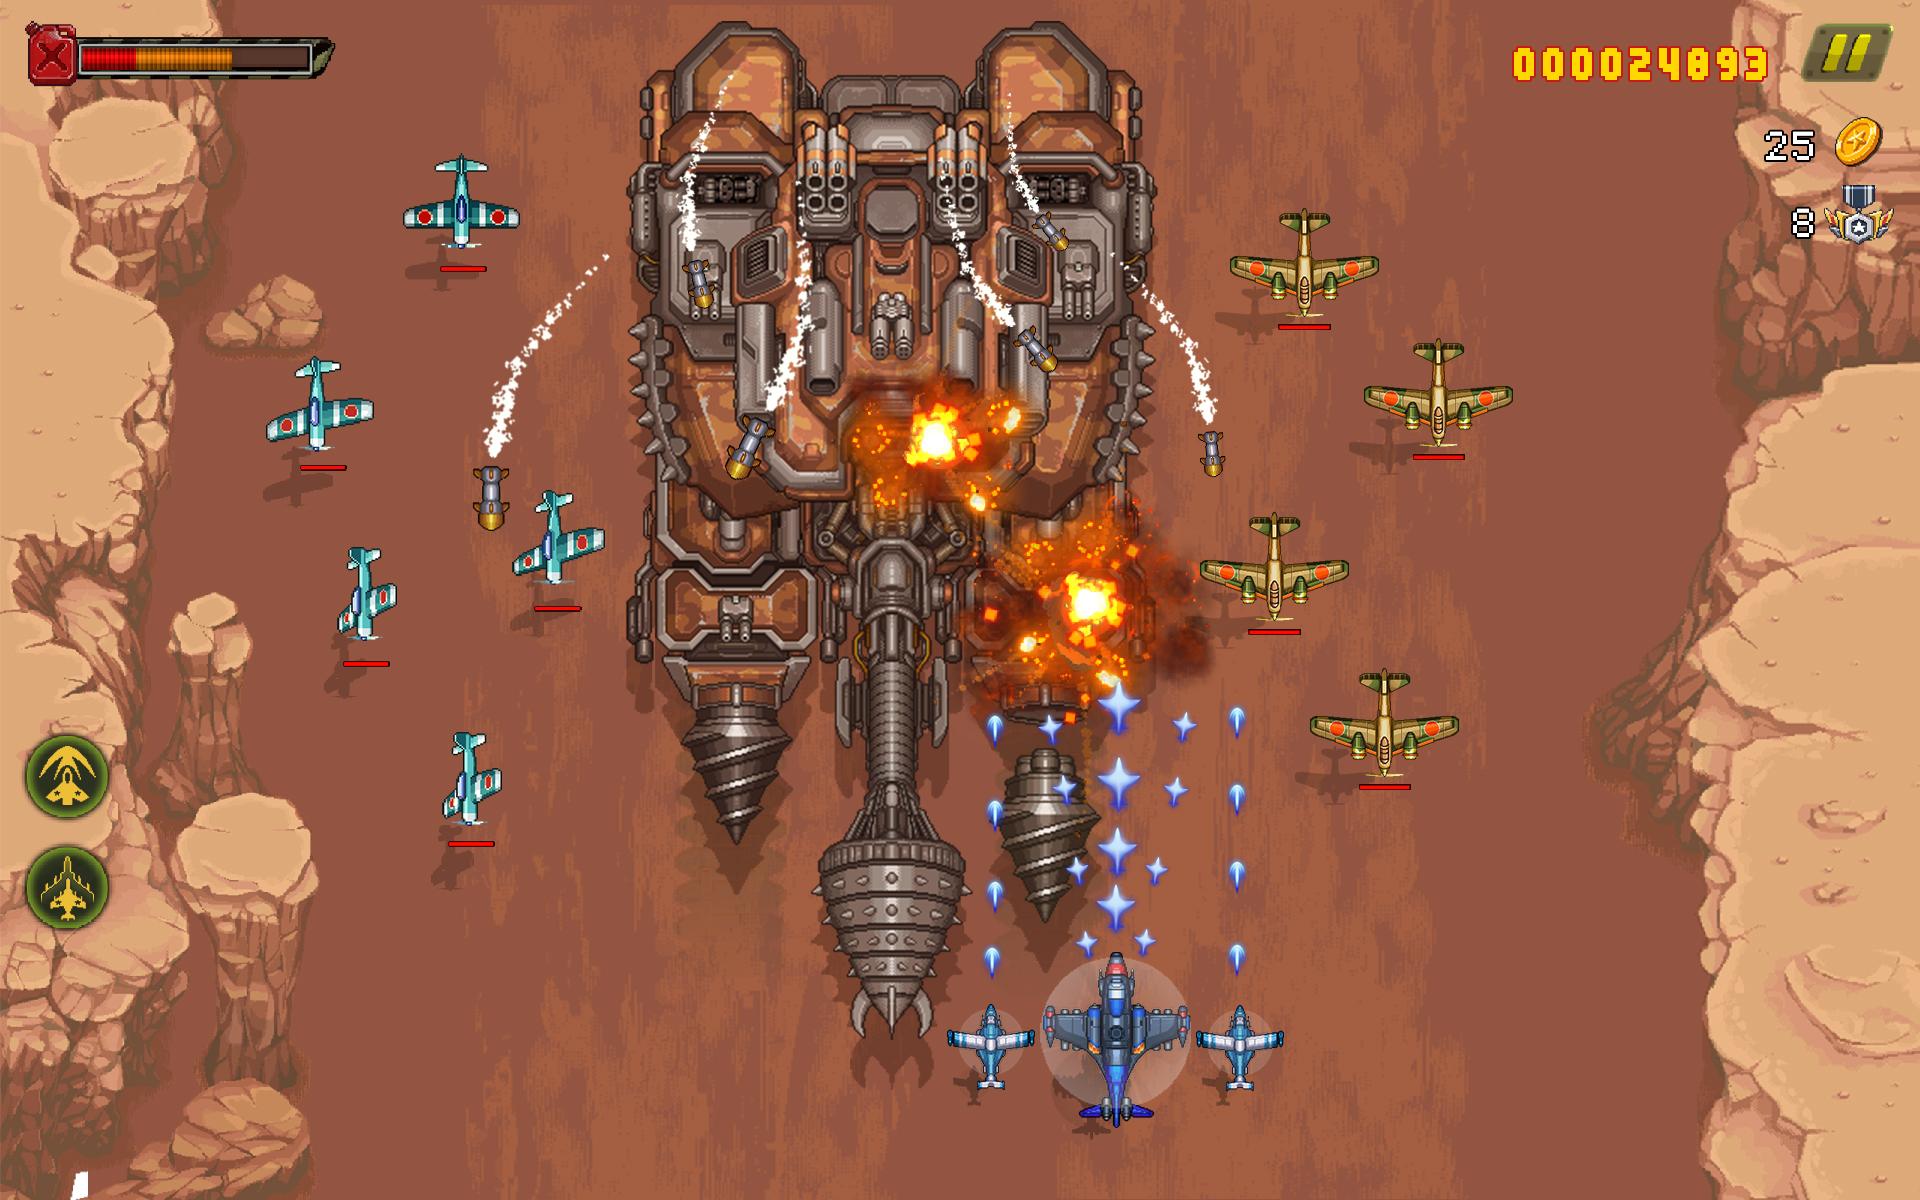 1945 Airforce Free Arcade Shooting Games For Android Apk Download